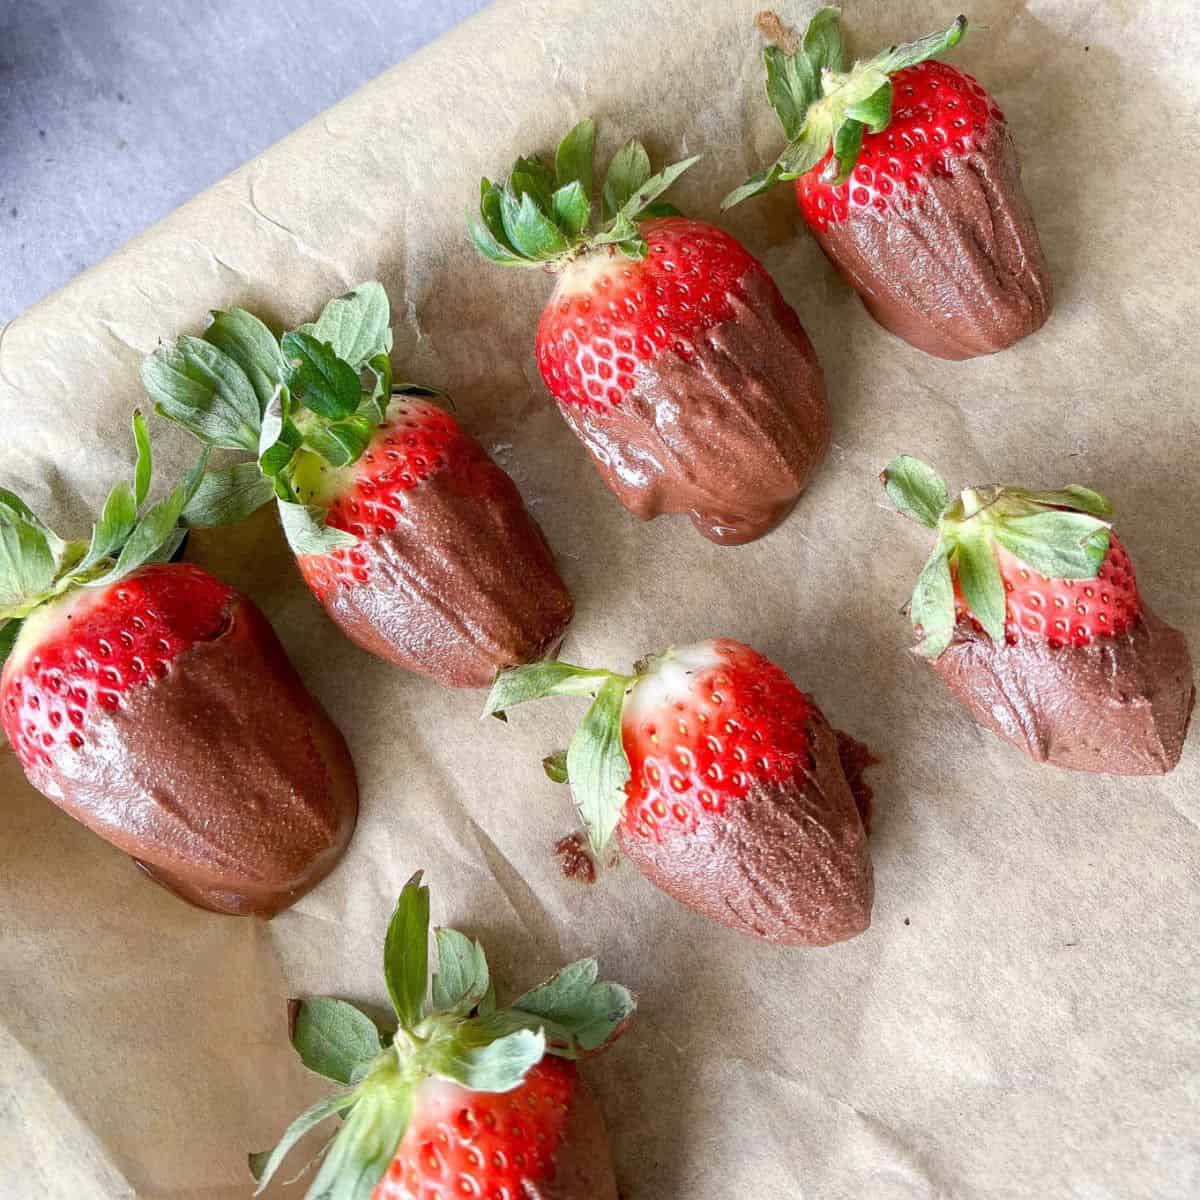 Healthy Chocolate Covered Strawberries on parchment paper